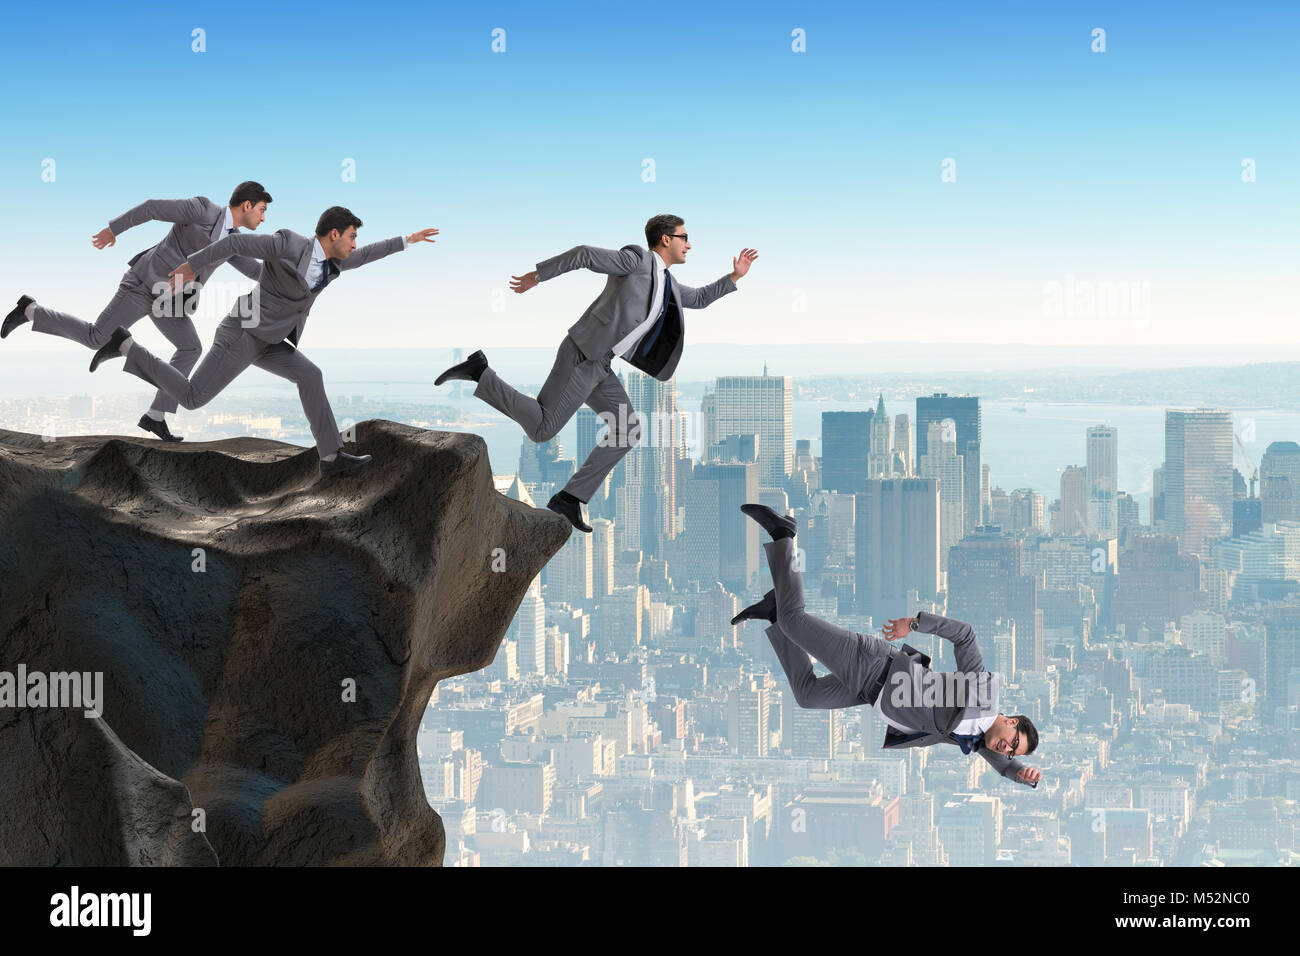 https://c8.alamy.com/comp/M52NC0/business-people-falling-off-the-cliff-M52NC0.jpg